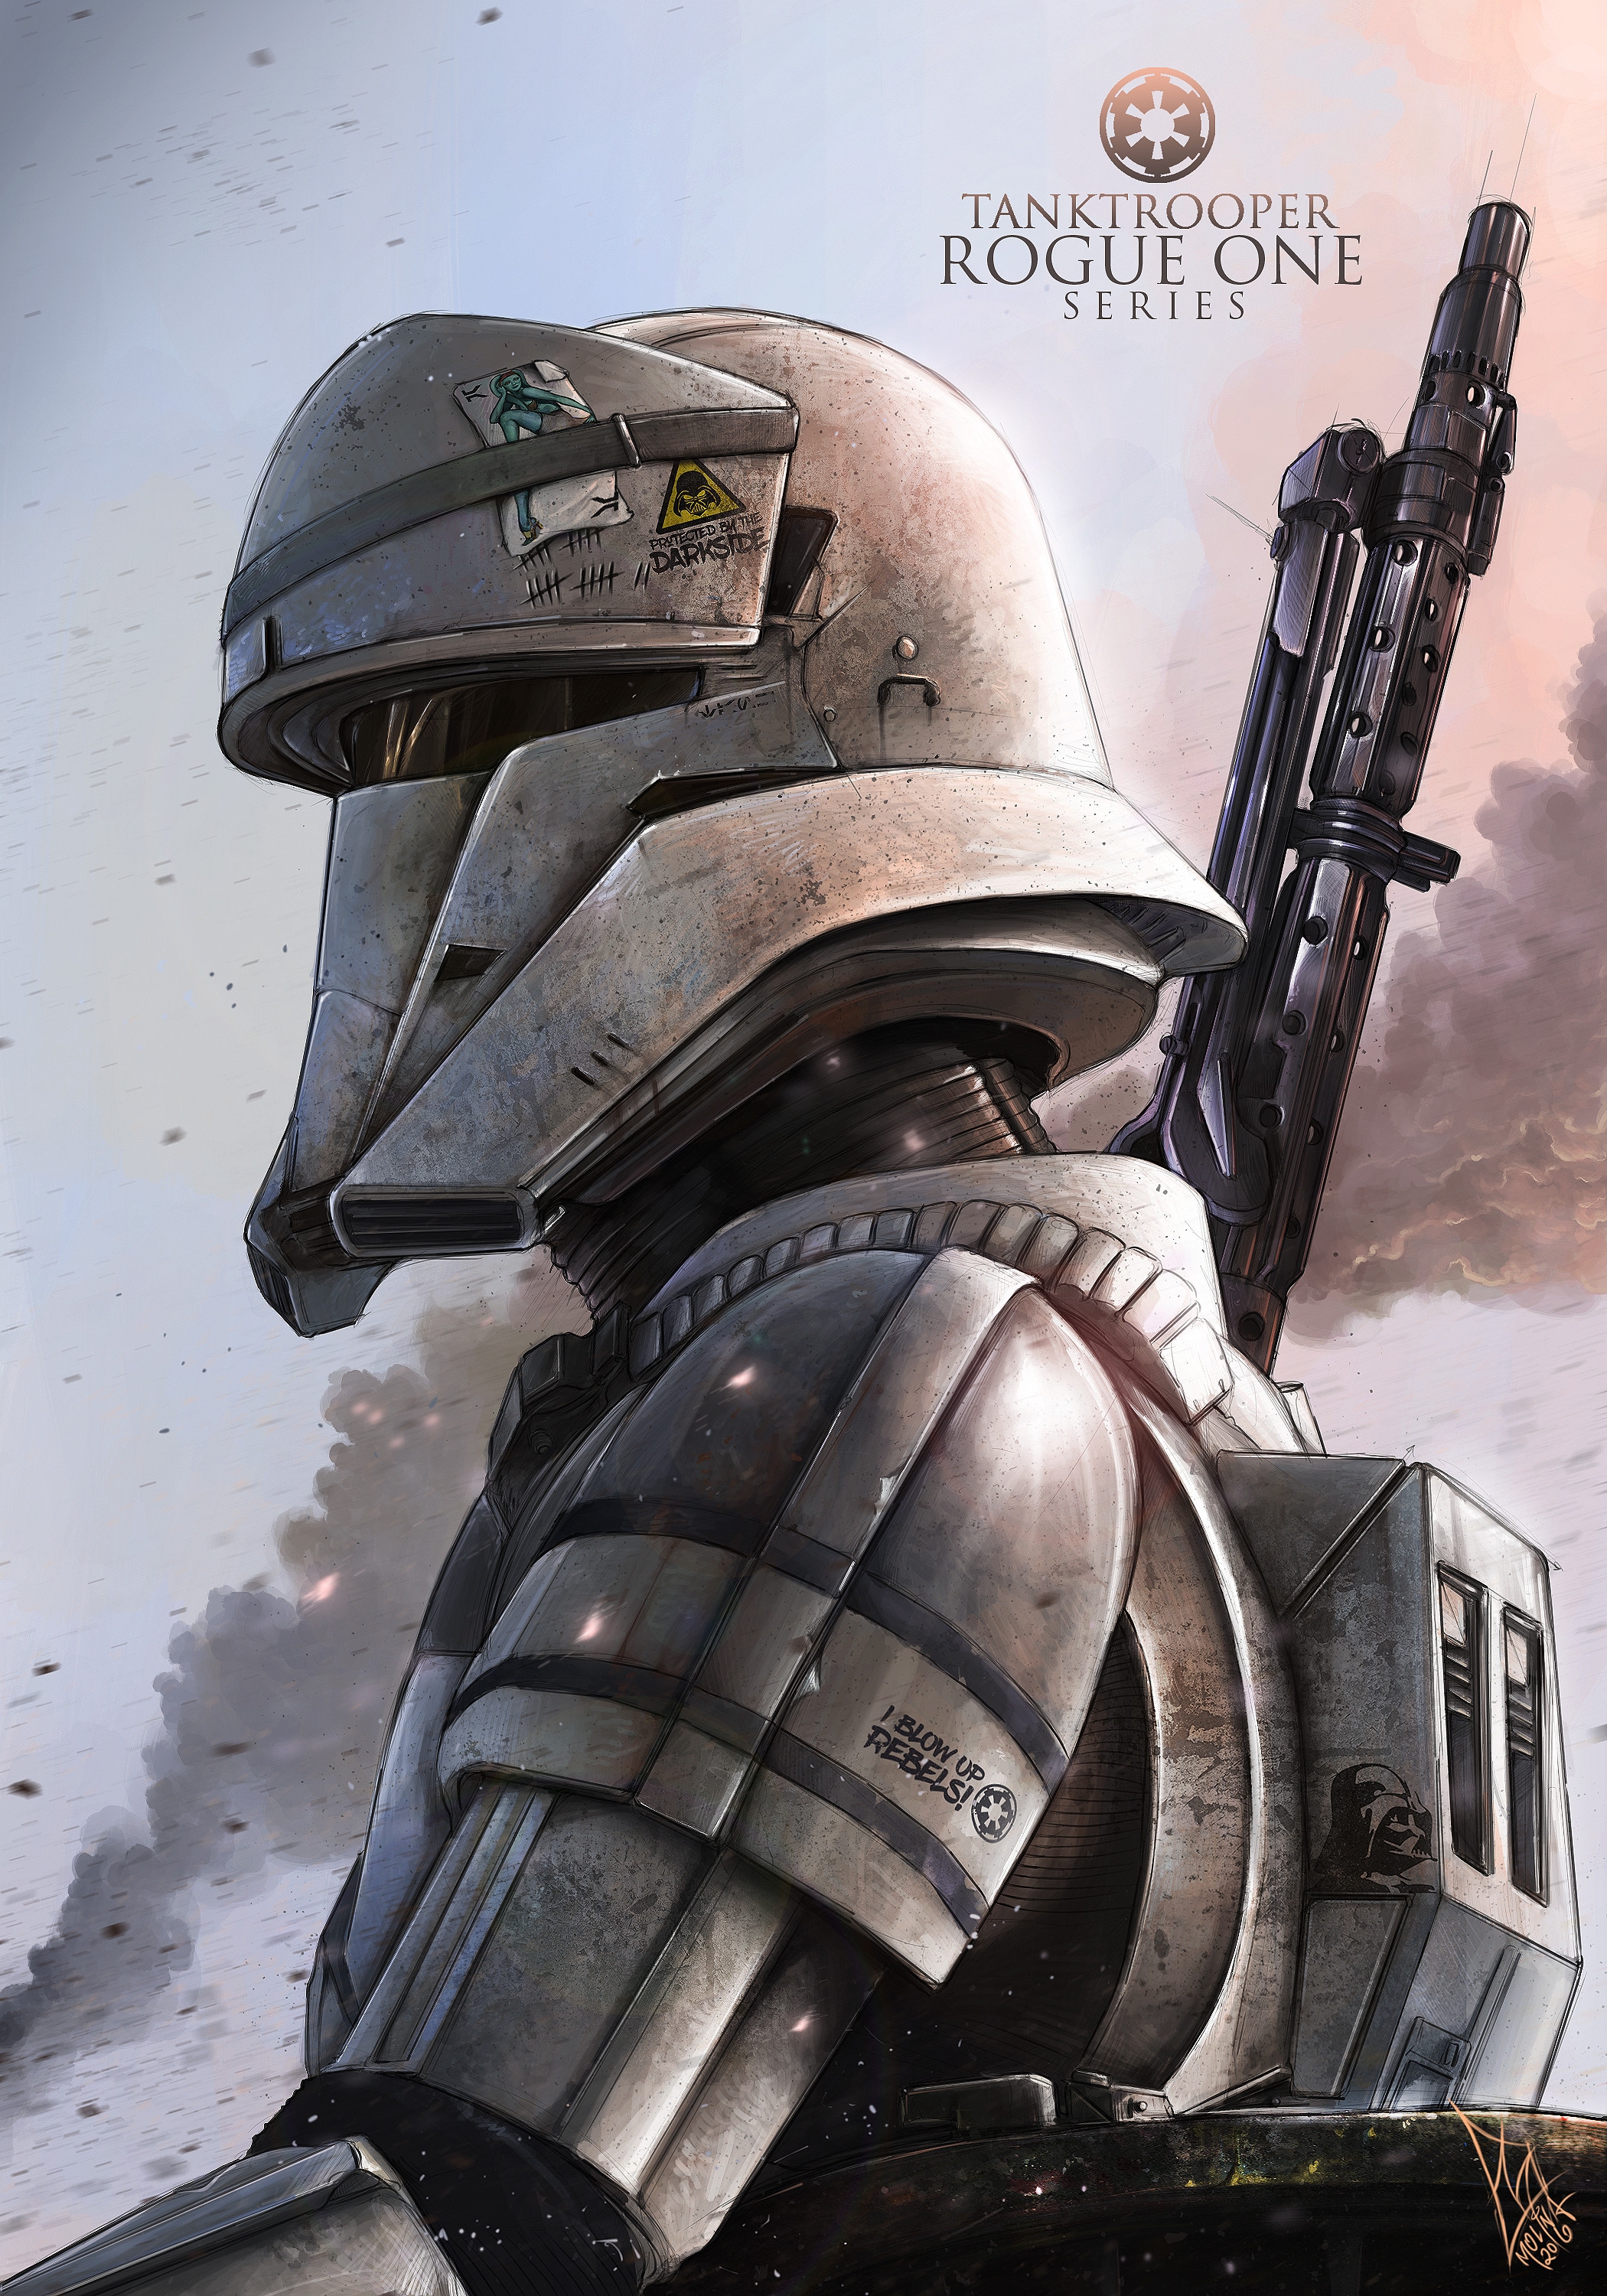 The Tank Trooper - Rogue One Series